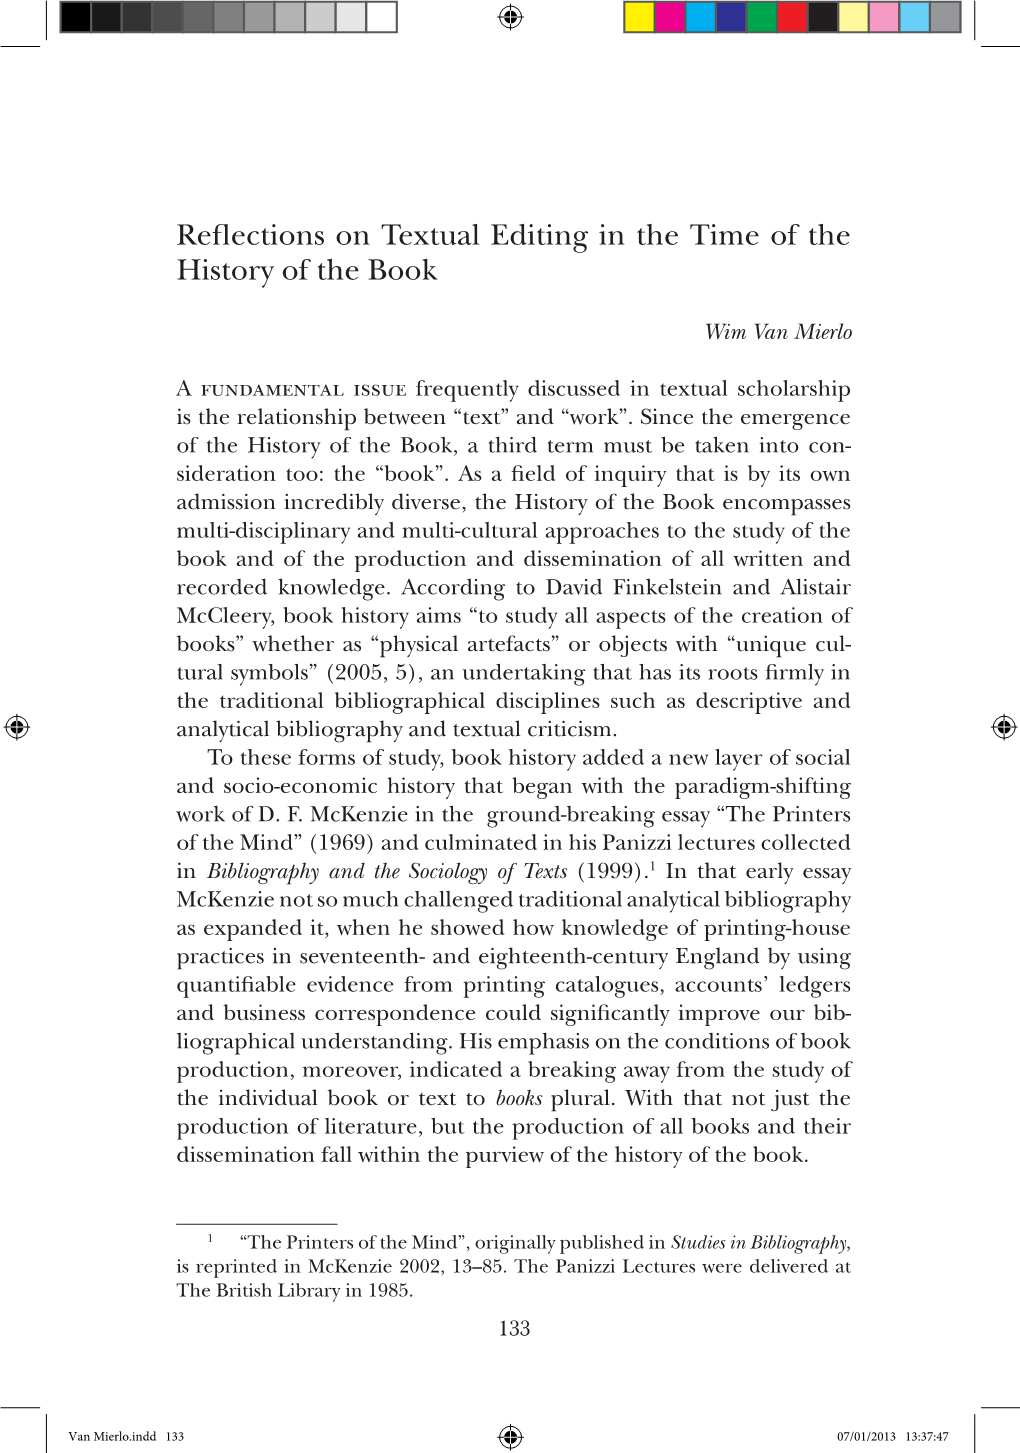 Reflections on Textual Editing in the Time of the History of the Book